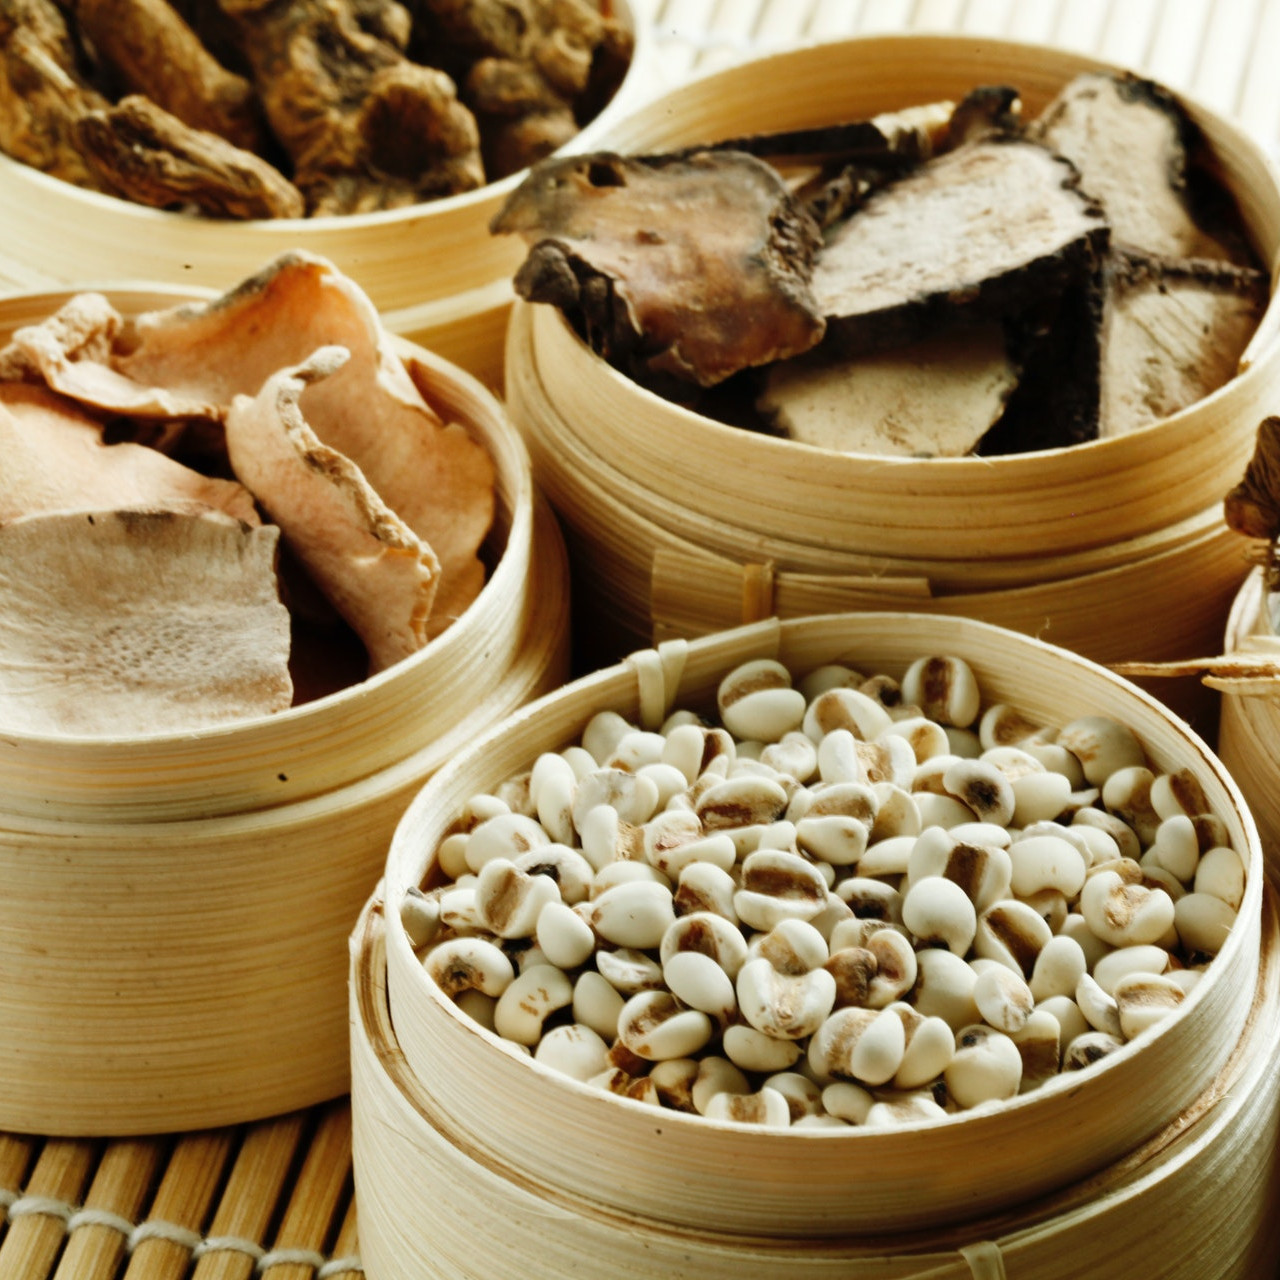 Traditional Chinese Medicine (TCM) Herbs in bamboo containers